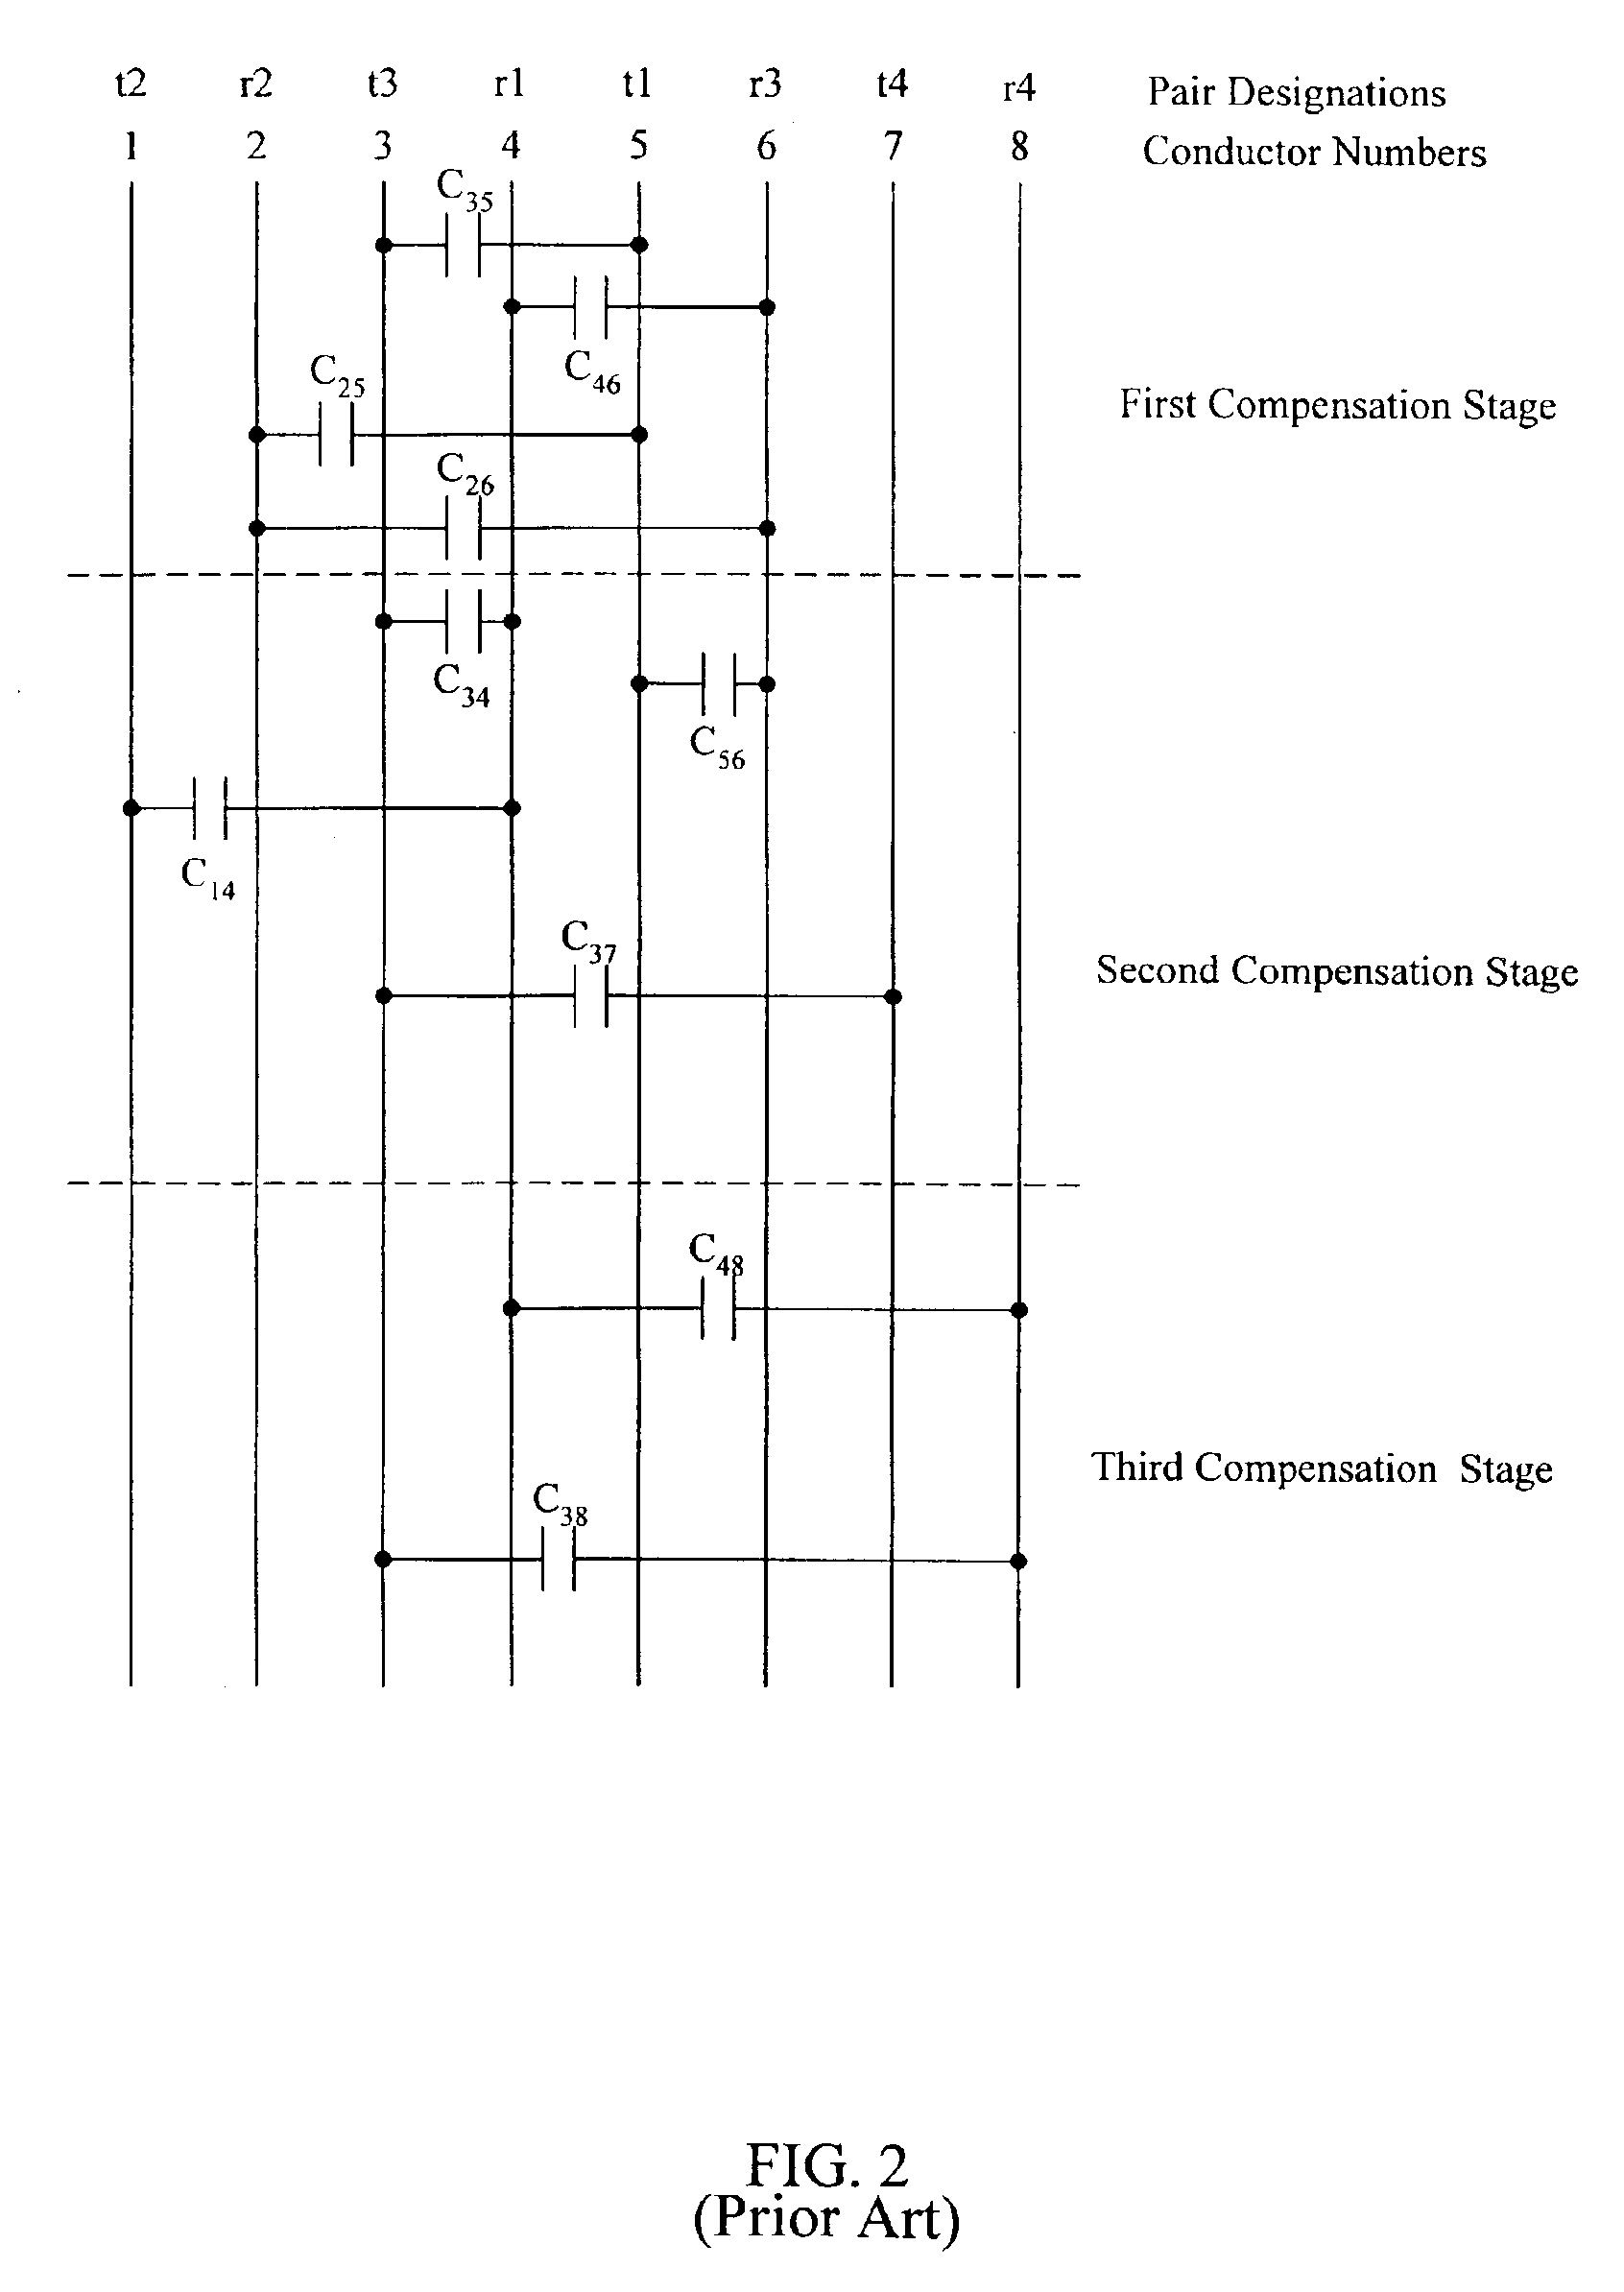 Correcting for near-end crosstalk unbalance caused by deployment of crosstalk compensation on other pairs